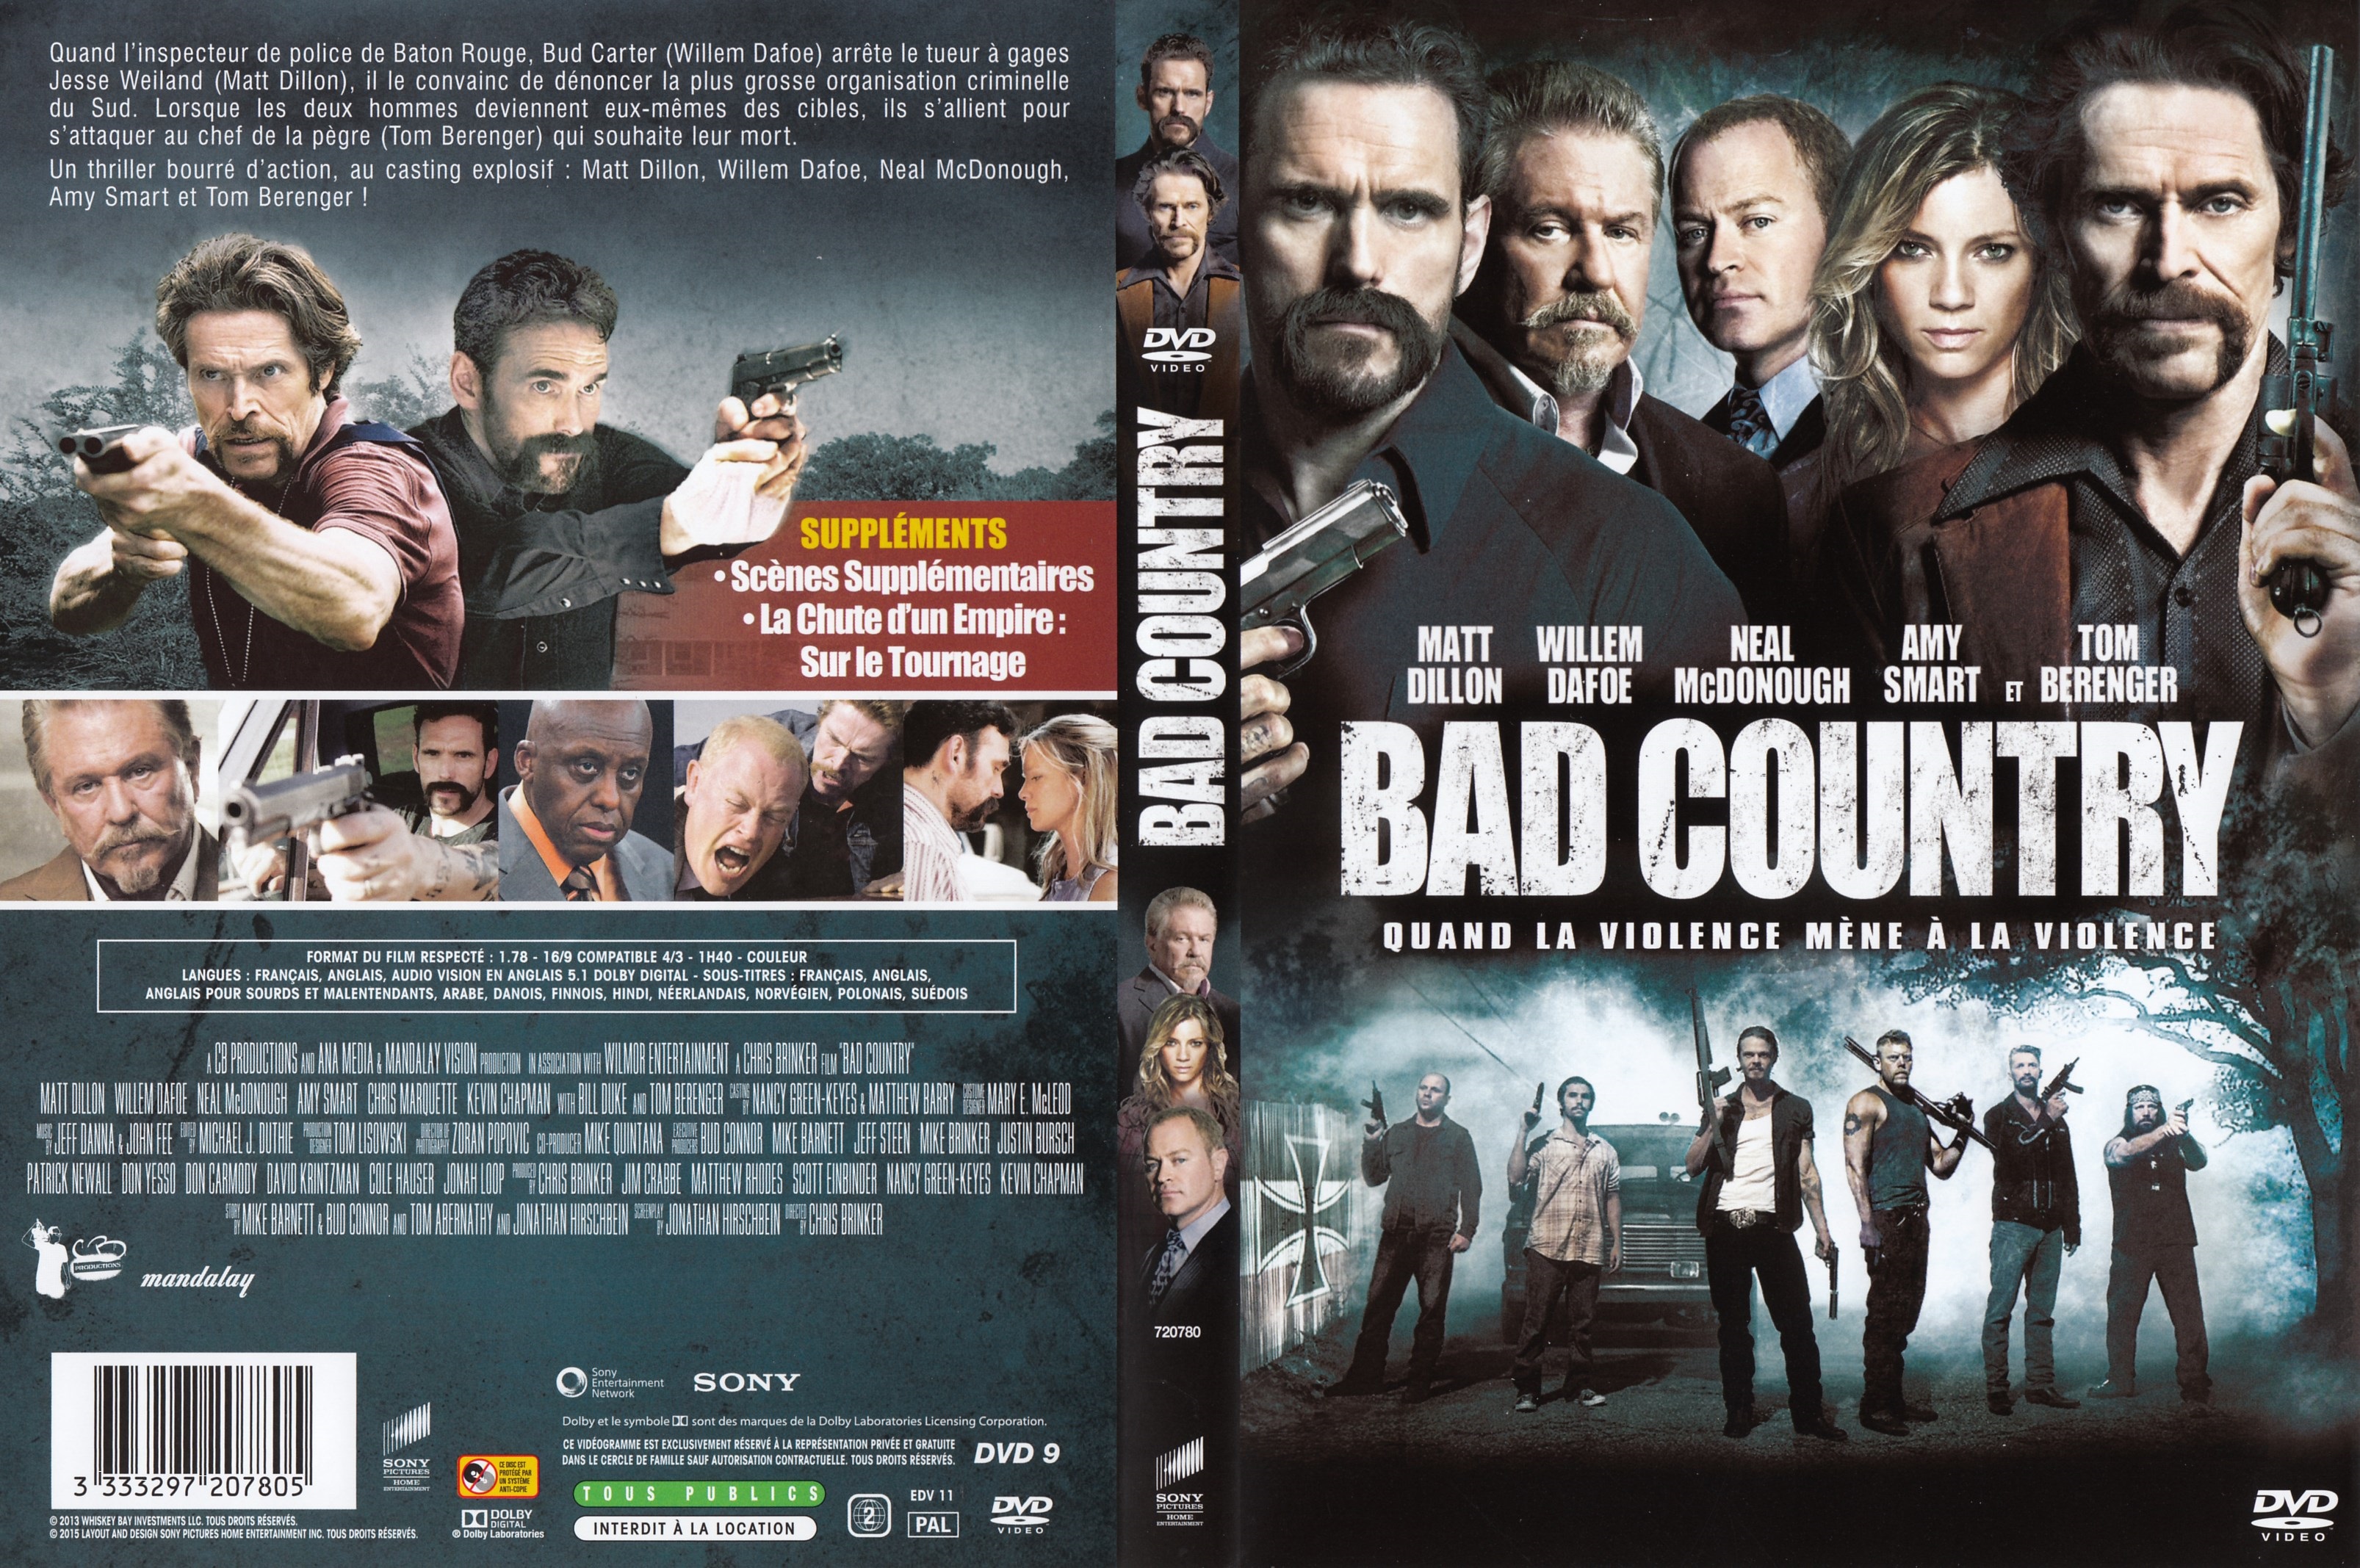 Jaquette DVD Bad country